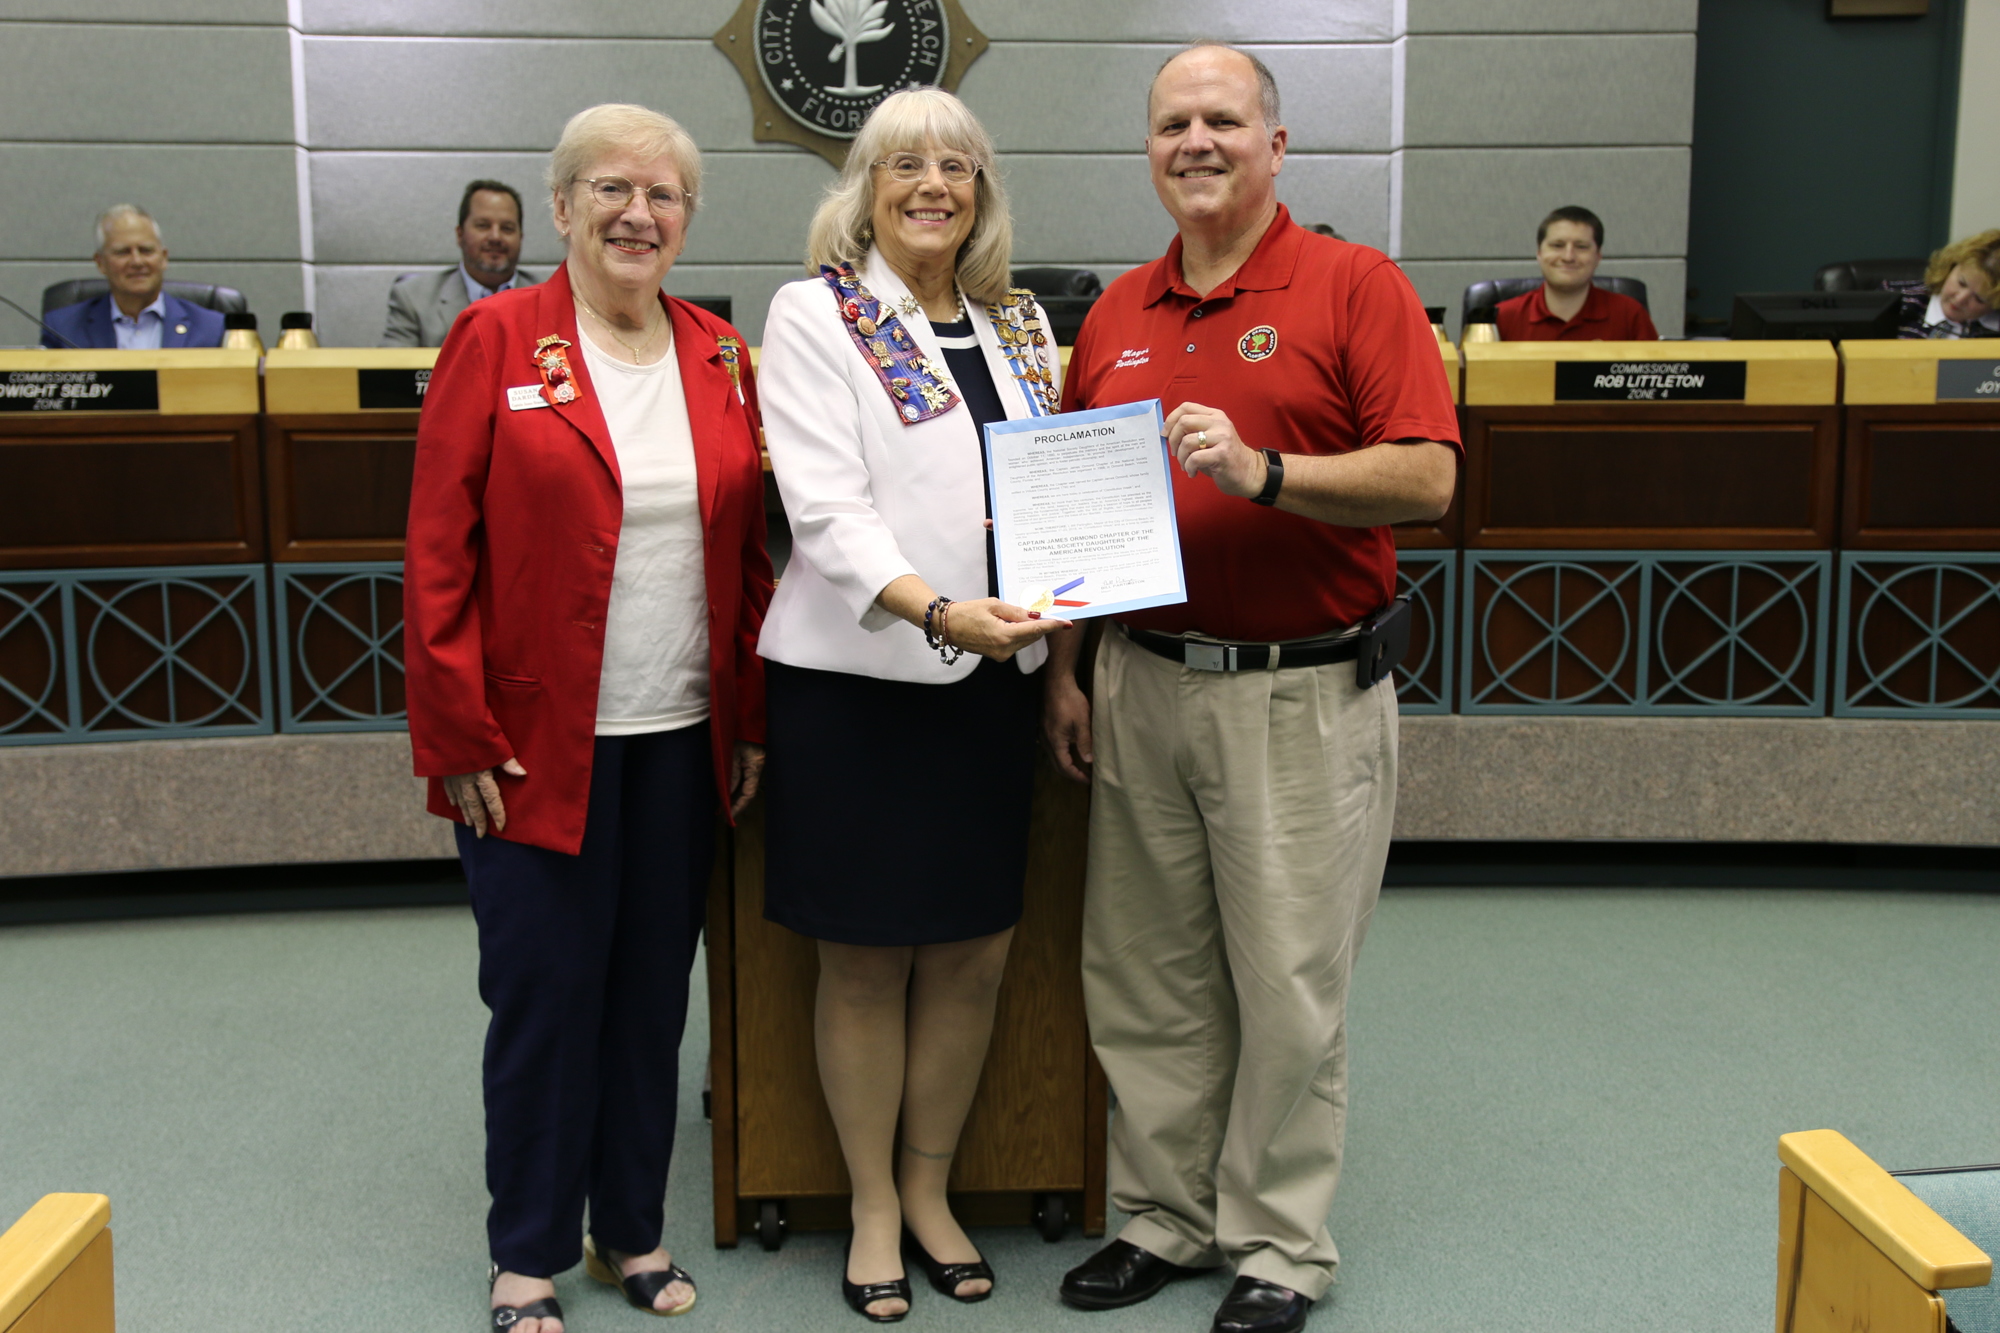 Susan Darden and Dee Clark of the Captain James Ormond chapter of the DAR smile with Ormond Beach Mayor Bill Partington. Photo by Jarleene Almenas